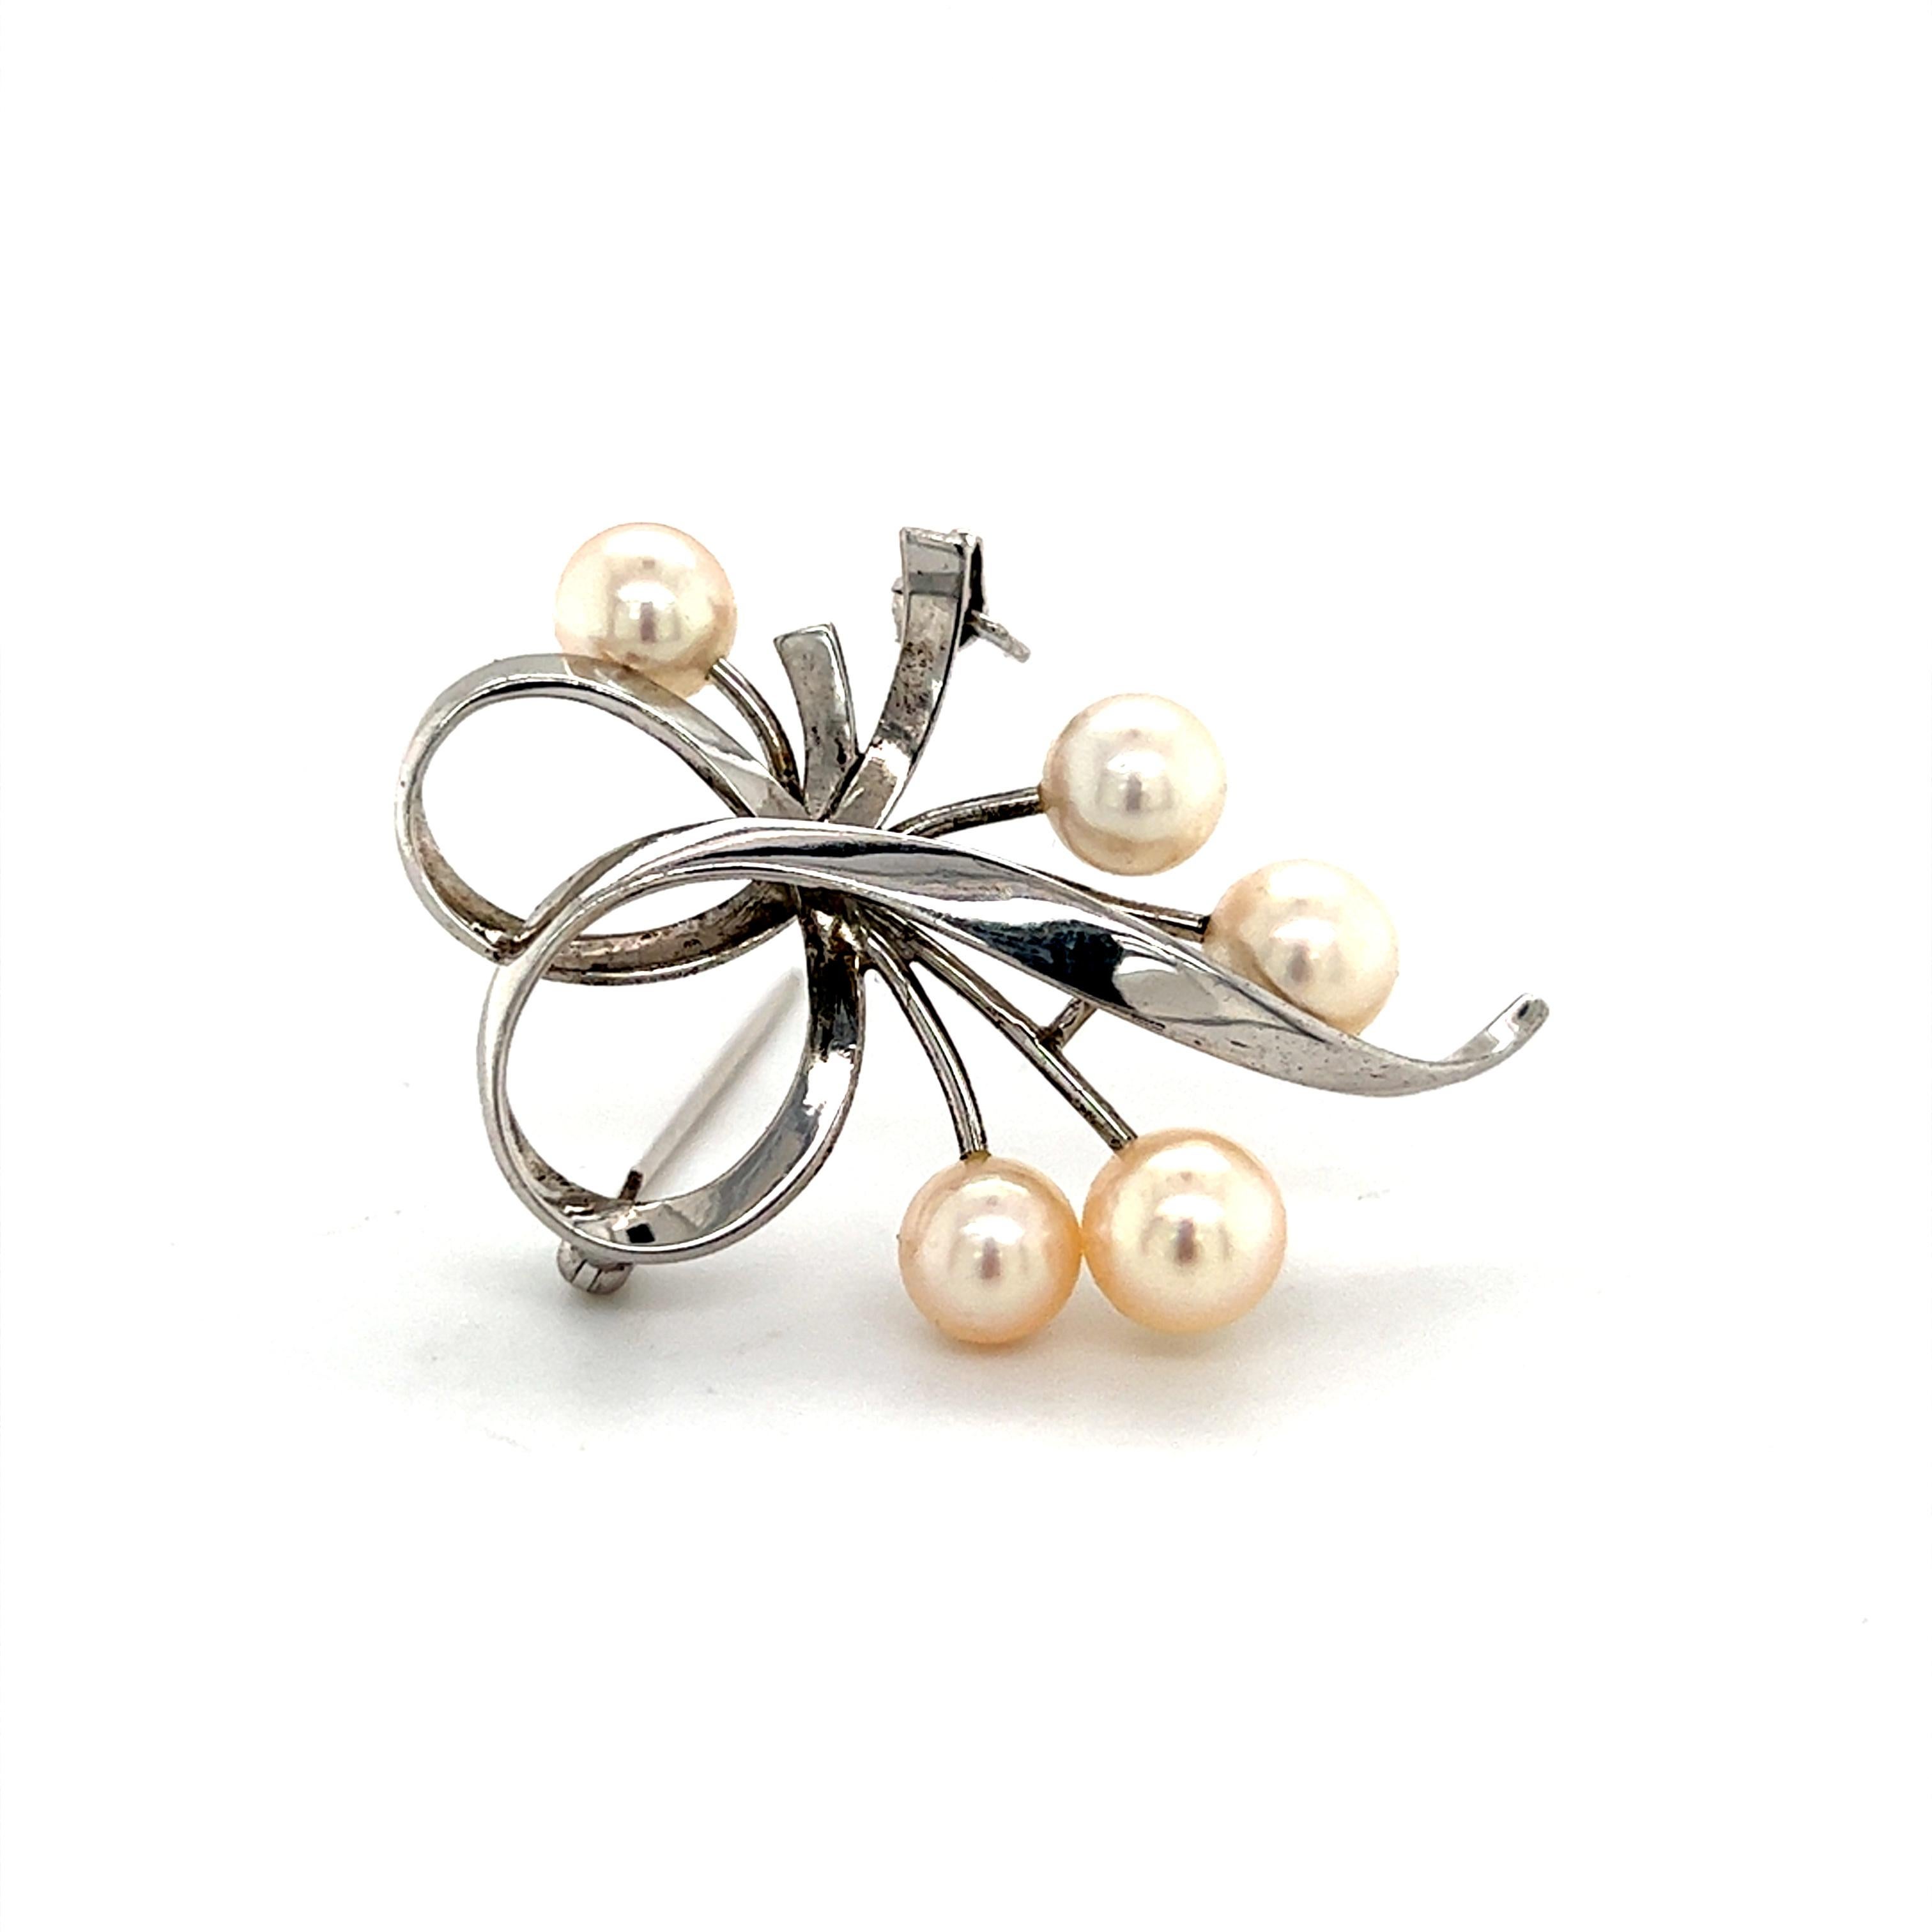 Mikimoto Estate Akoya Pearl Brooch Sterling Silver 6.6 mm 5.2 Grams For Sale 3